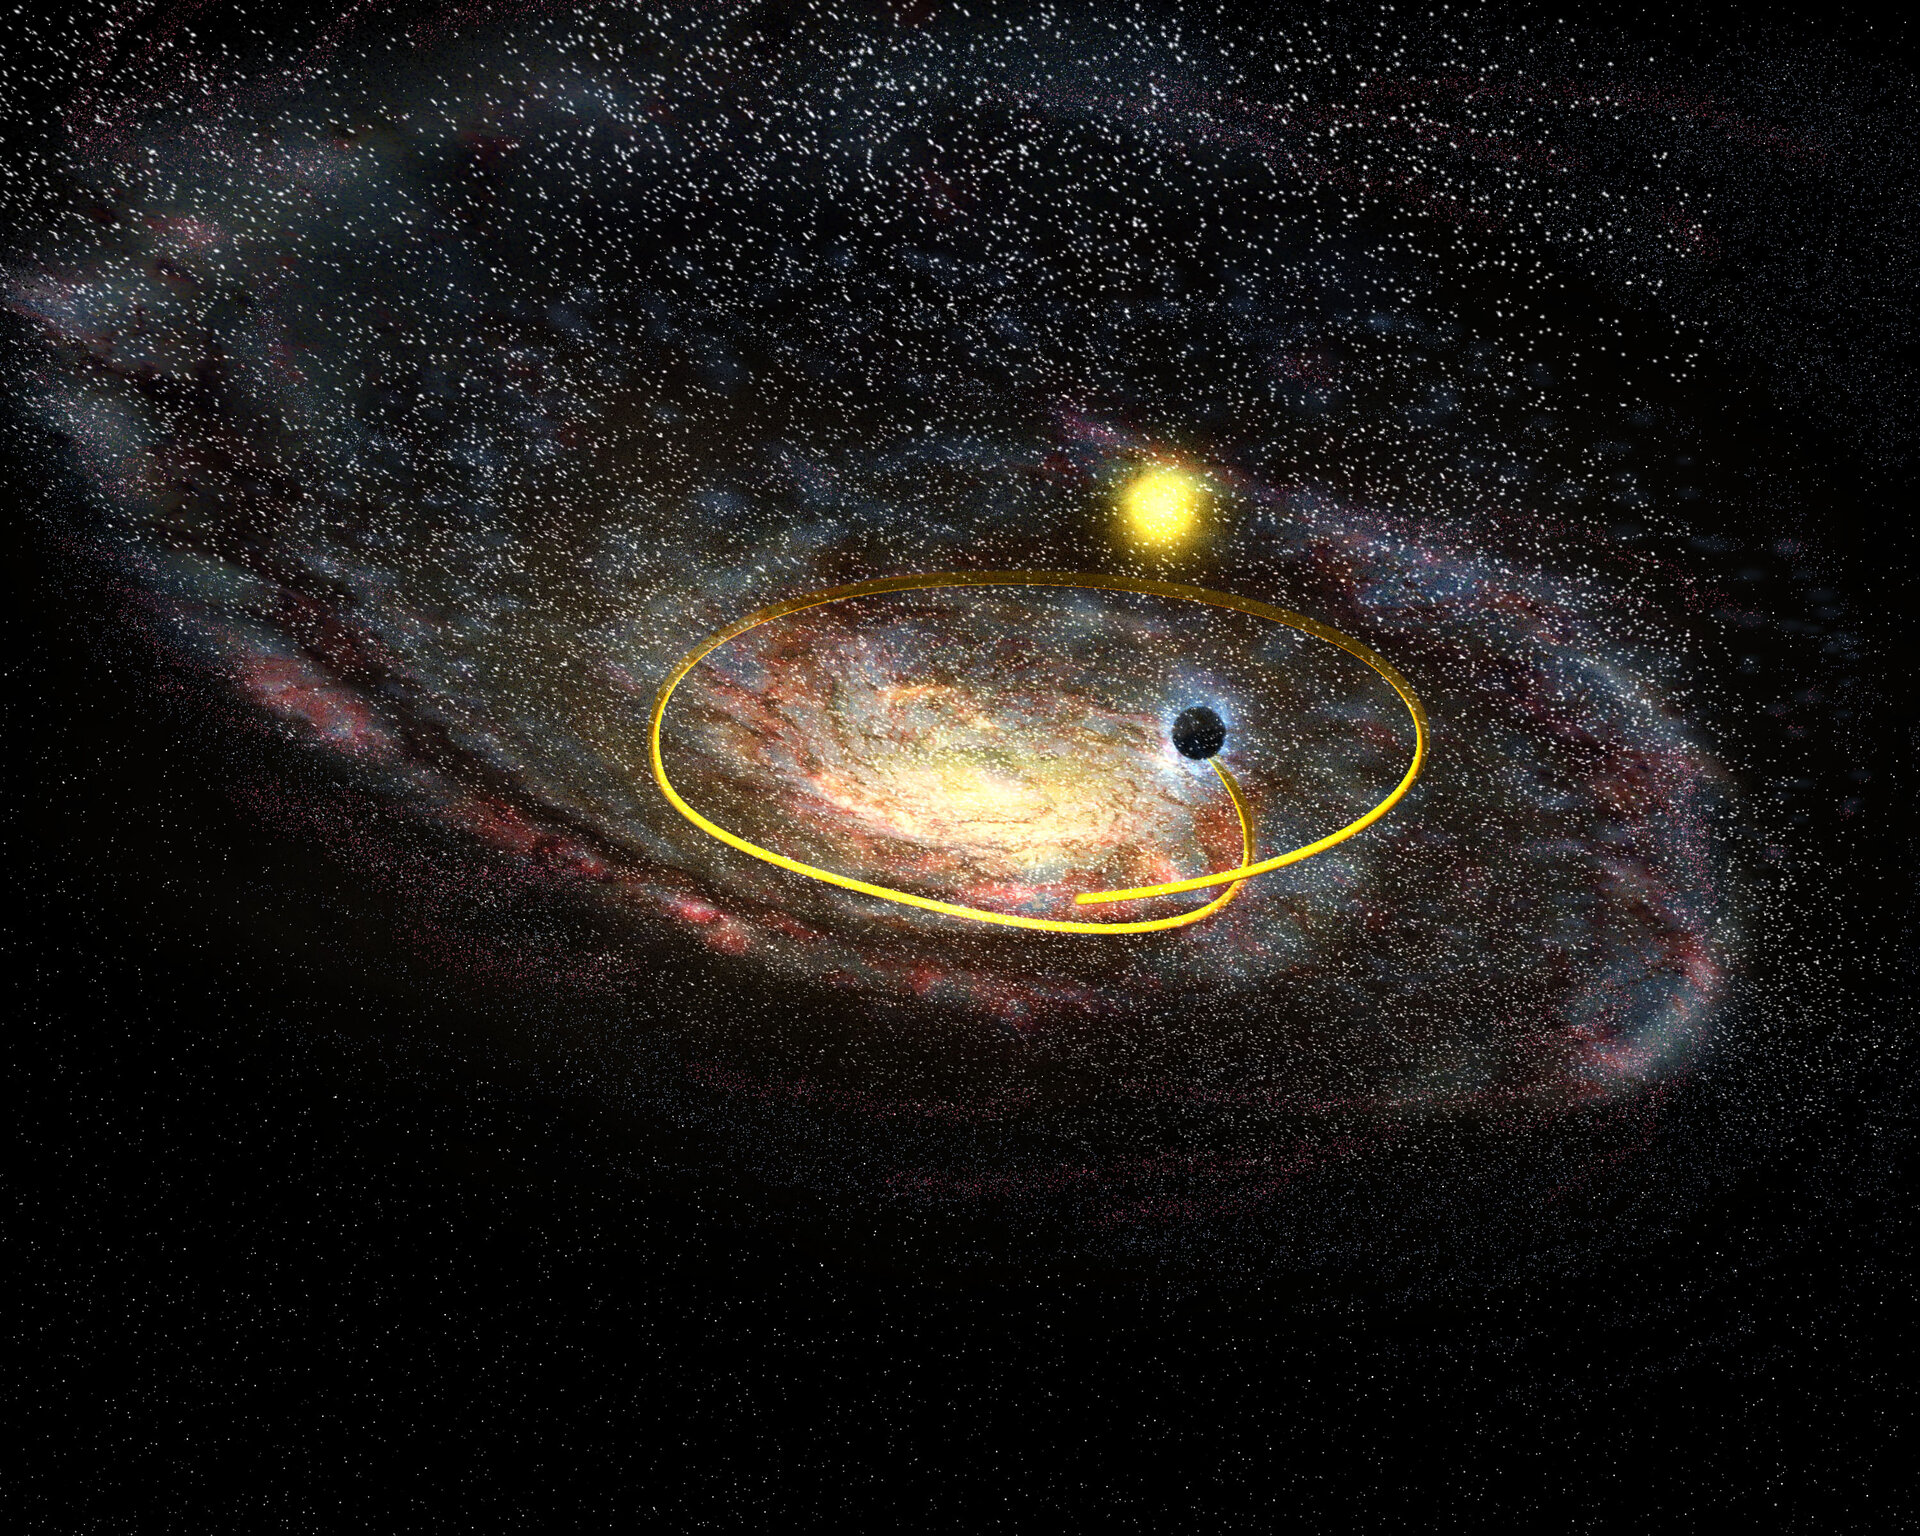 GRO JI655-40, a black hole hurtles across the plane of the Milky Way